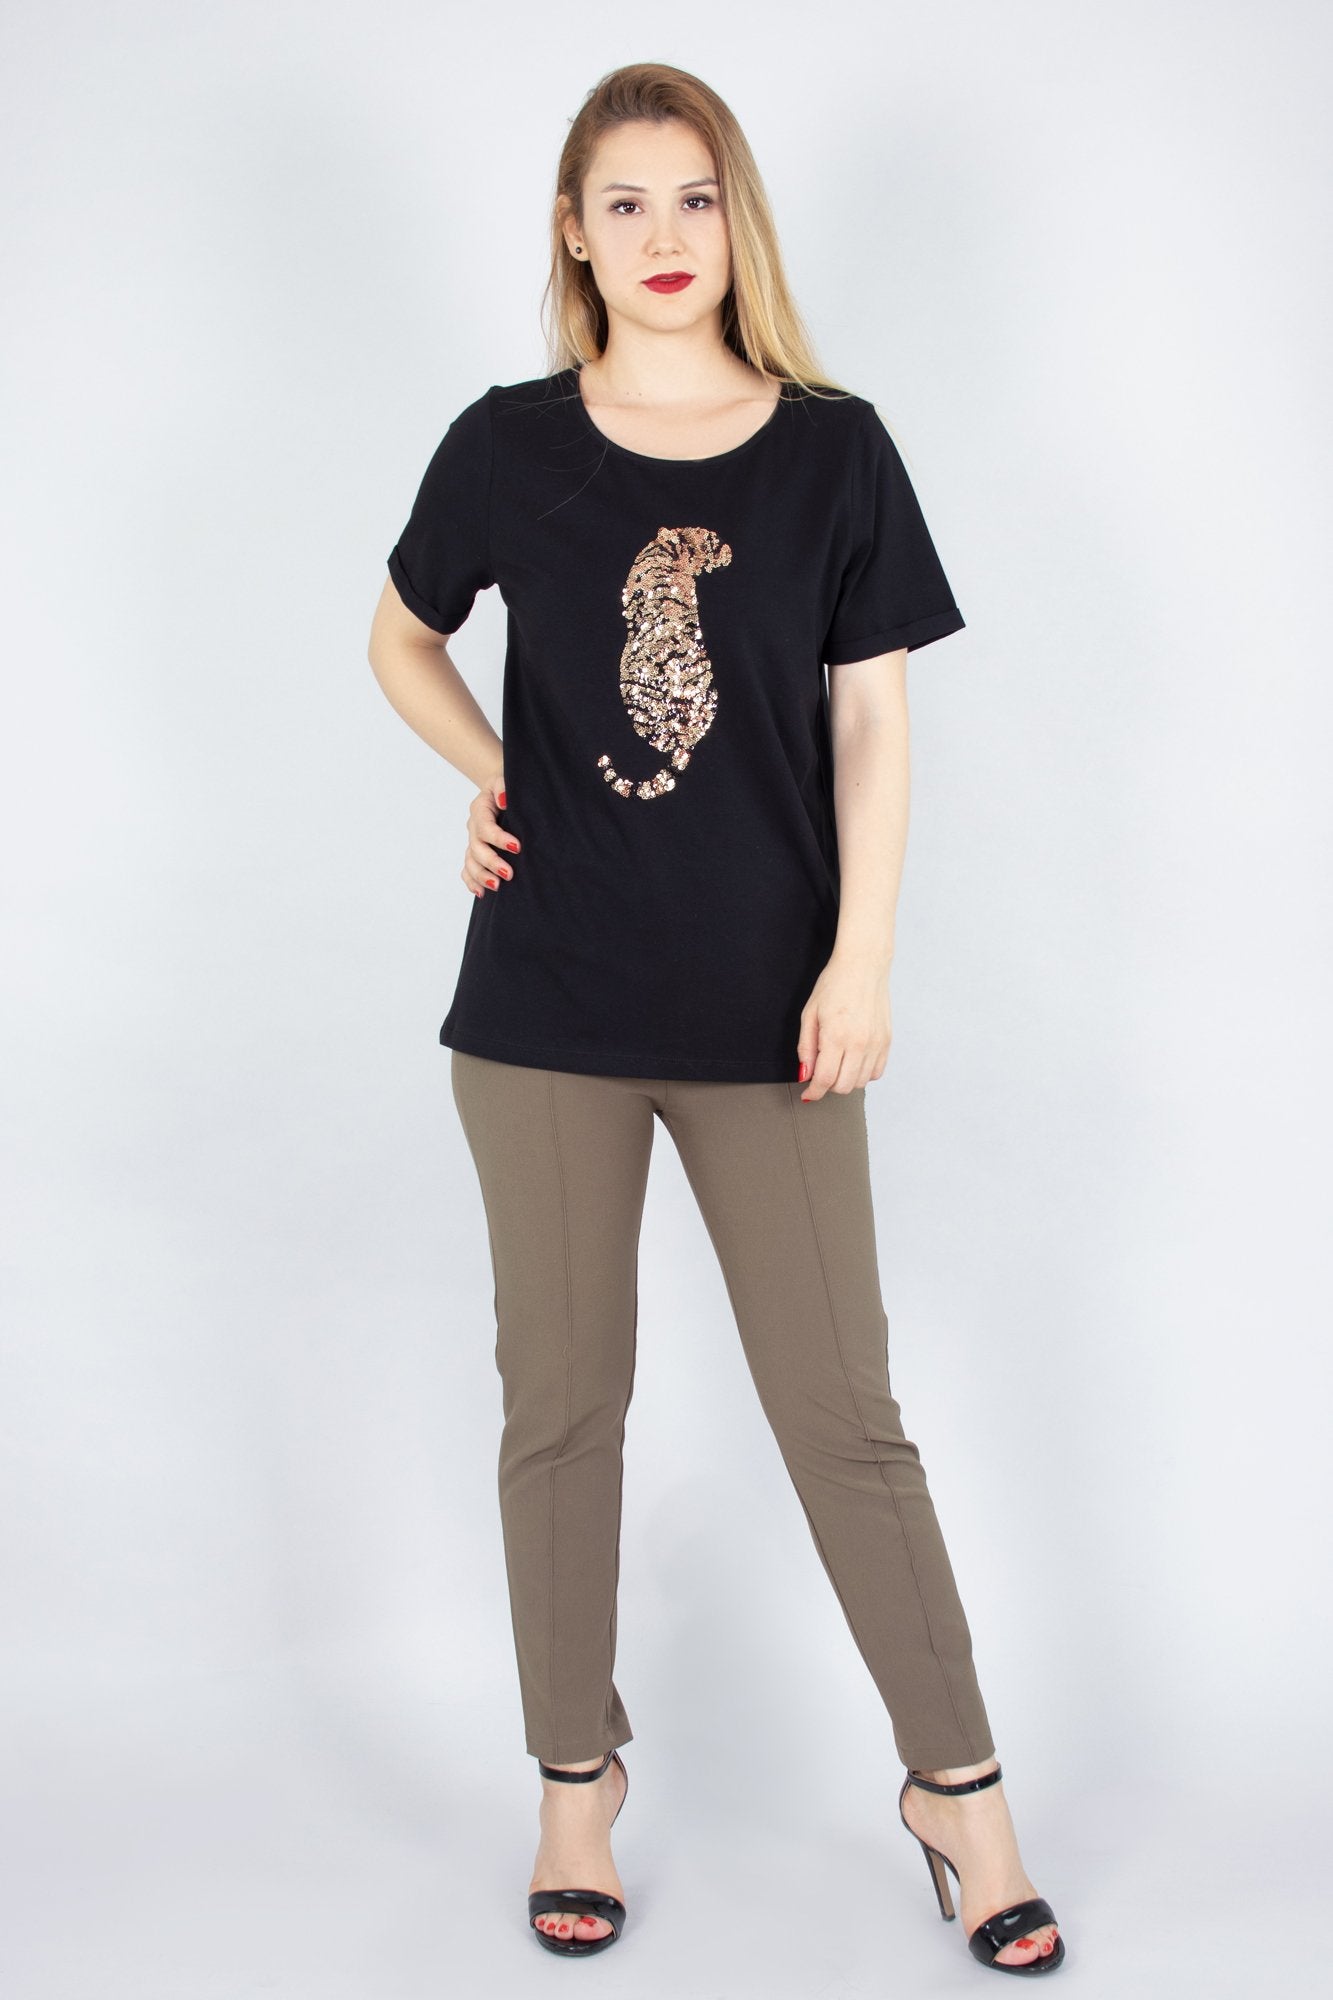 chassca boat neck t-shirt with sequin embellishment - Breakmood